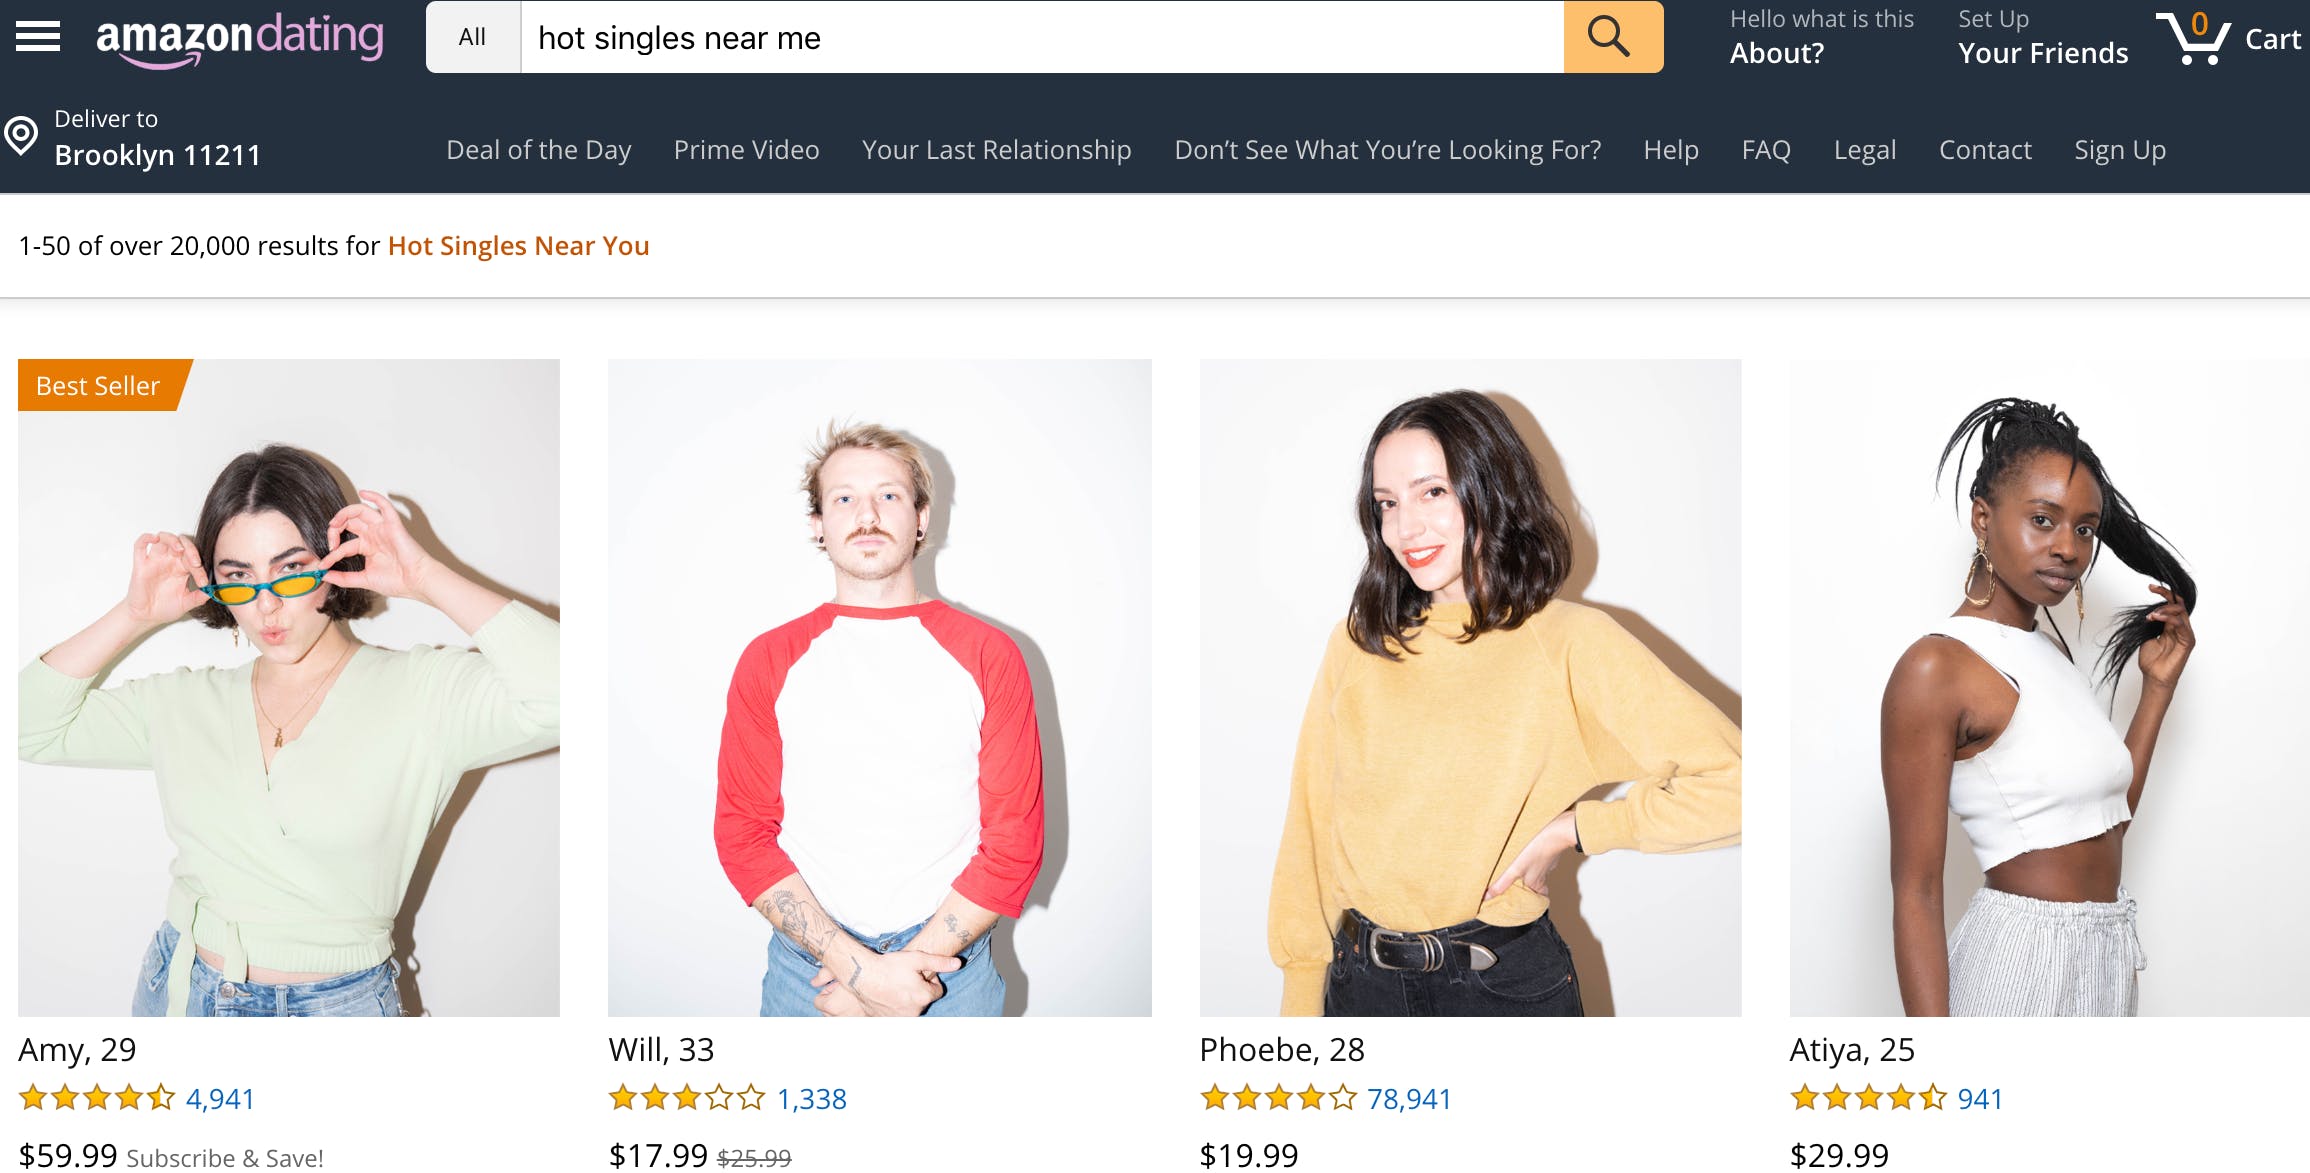 Check out Amazon Dating